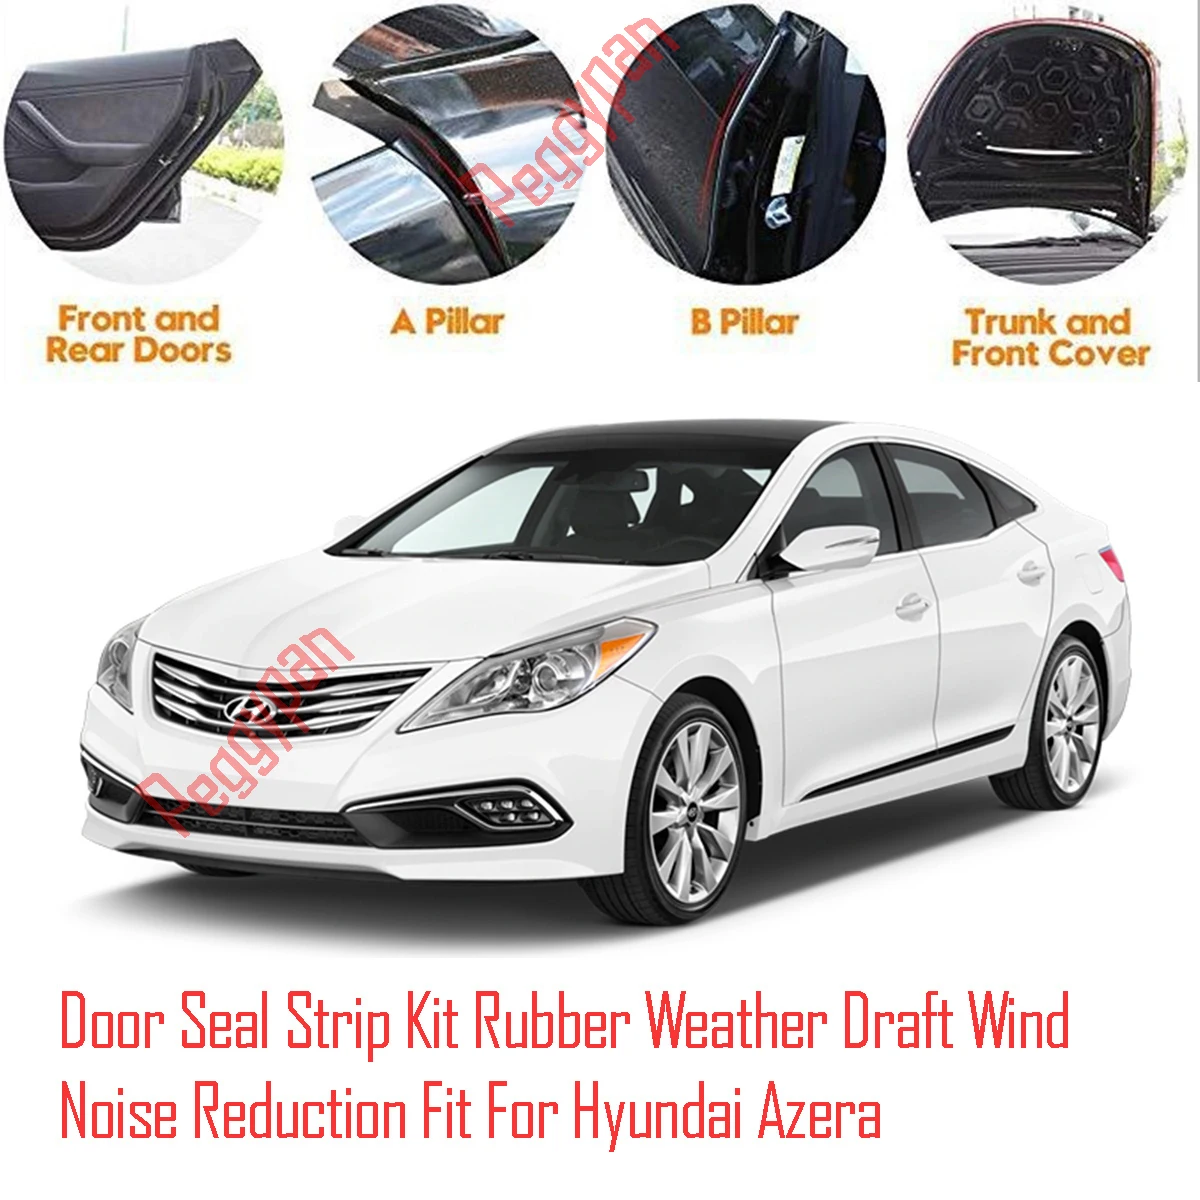 Door Seal Strip Kit Self Adhesive Window Engine Cover Soundproof Rubber Weather Draft Wind Noise Reduction Fit For Hyundai Azera